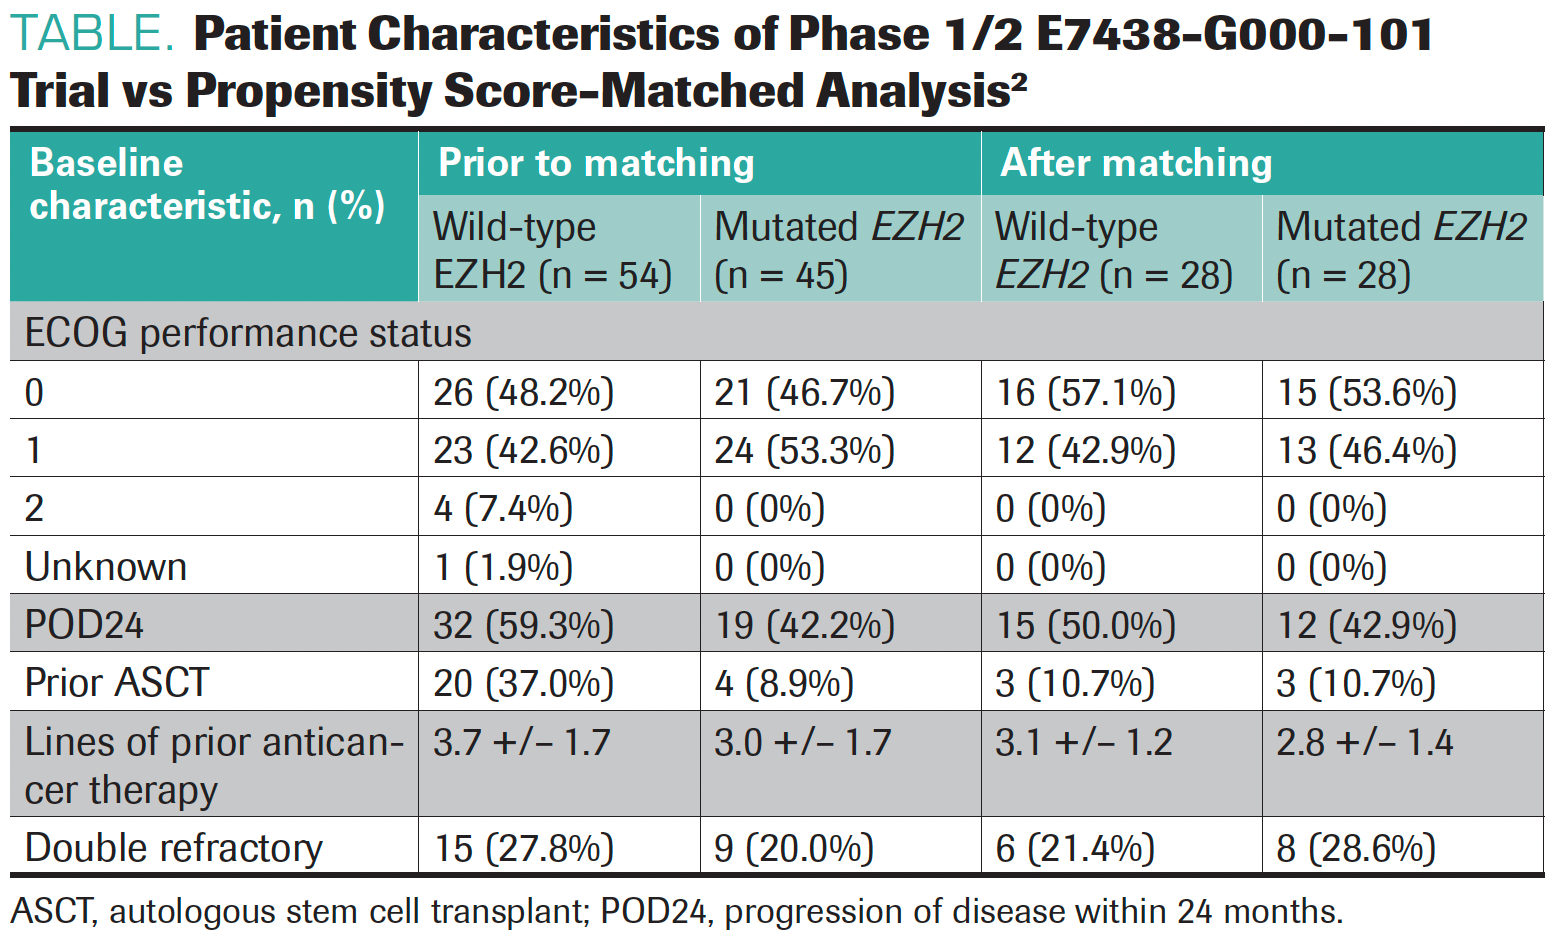 TABLE. Patient Characteristics of Phase 1/2 E7438-G000-101 Trial vs Propensity Score-Matched Analysis2